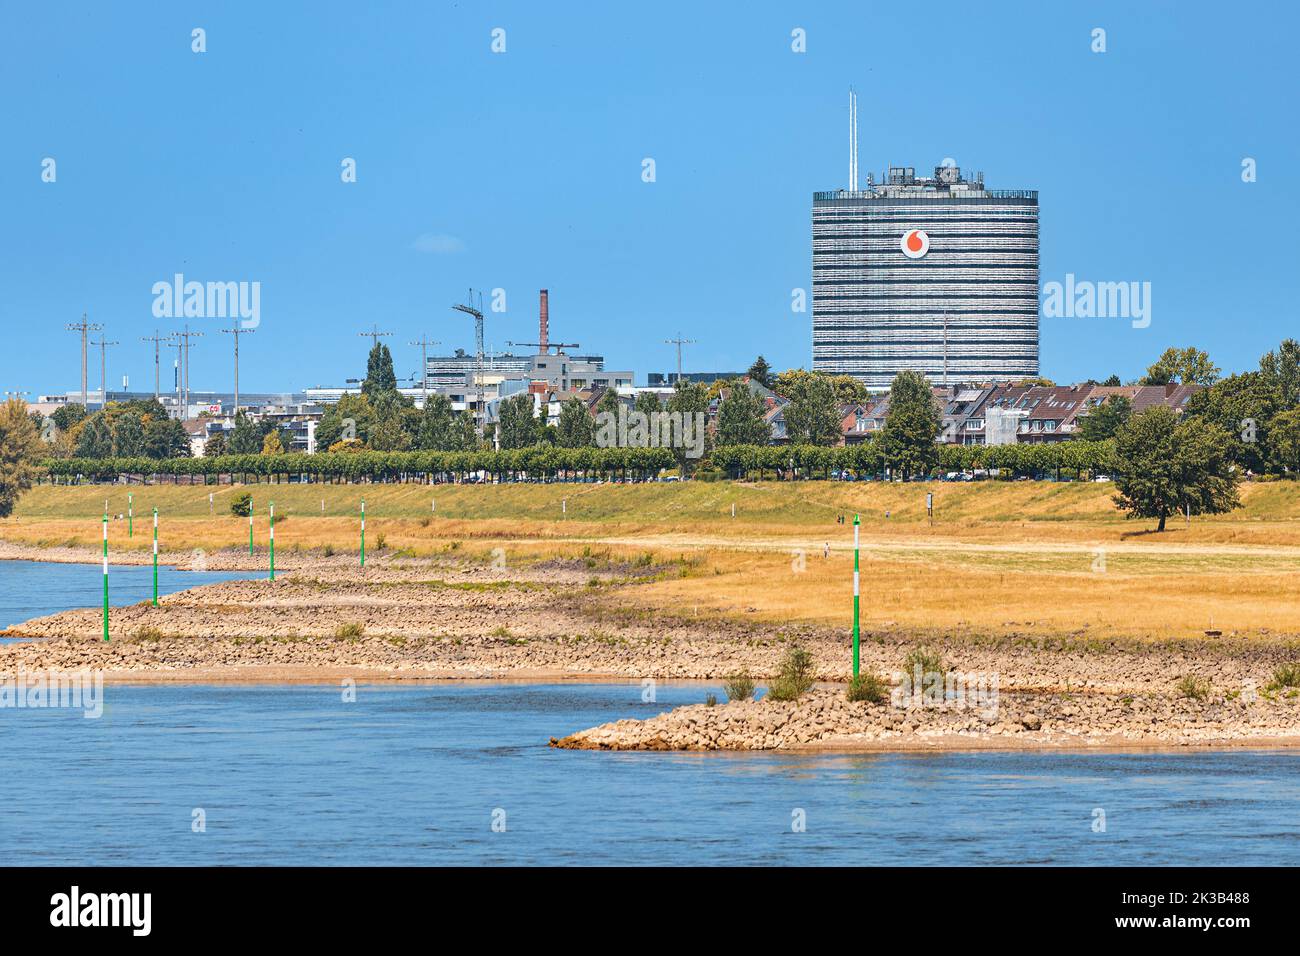 23 July 2022, Dusseldorf, Germany: Industrial area with chemicals plants and factories in city suburbs. Rhine river in the foreground. Stock Photo